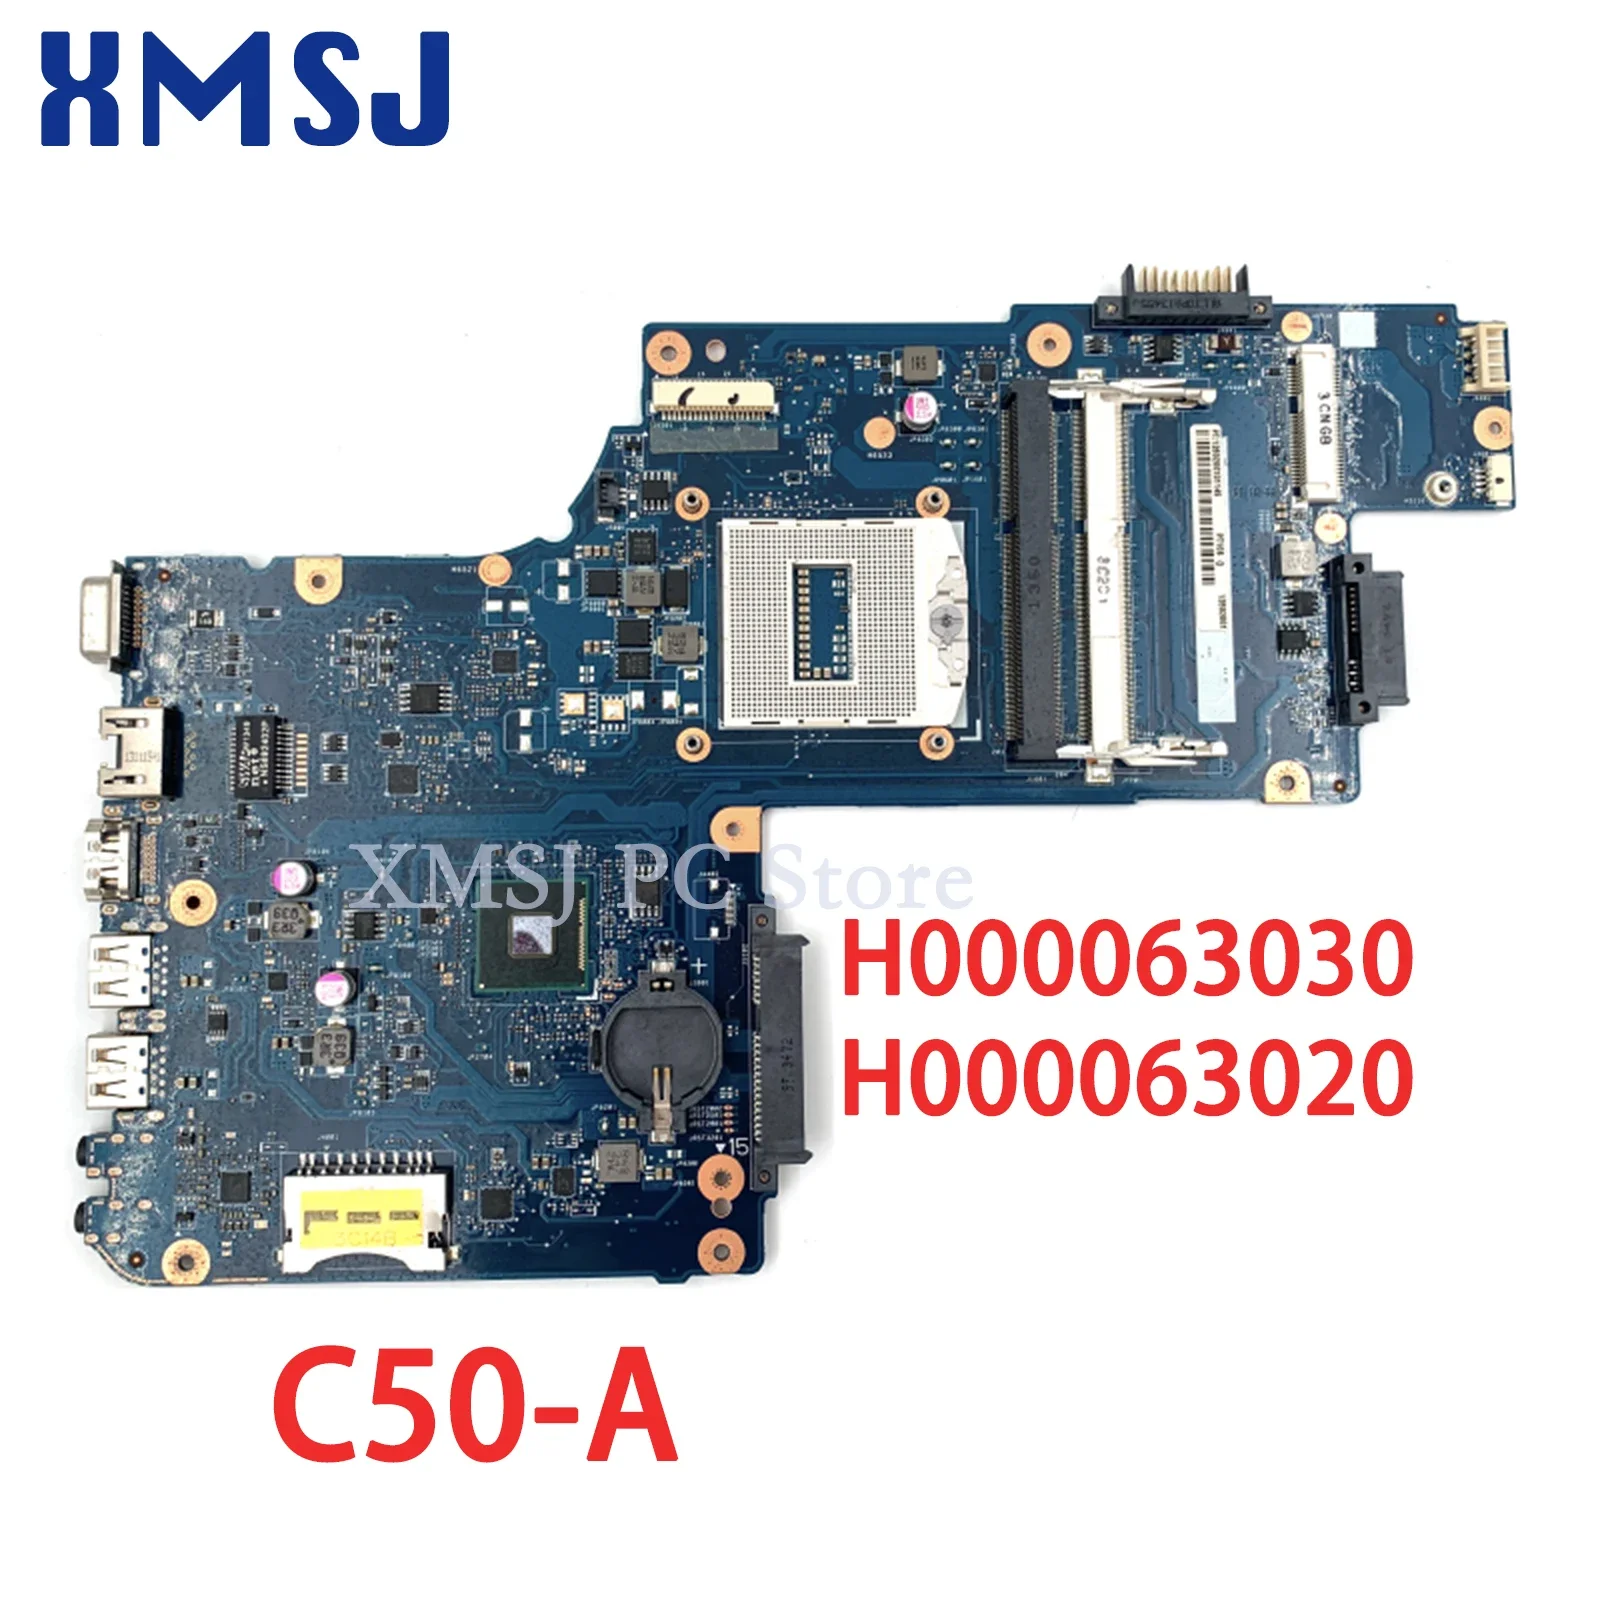 

XMSJ For Toshiba Satellite C50-A PT10S H000063030 H000063020 Laptop Motherboard UMA MB HM86 DDR3L Main Board Full Test